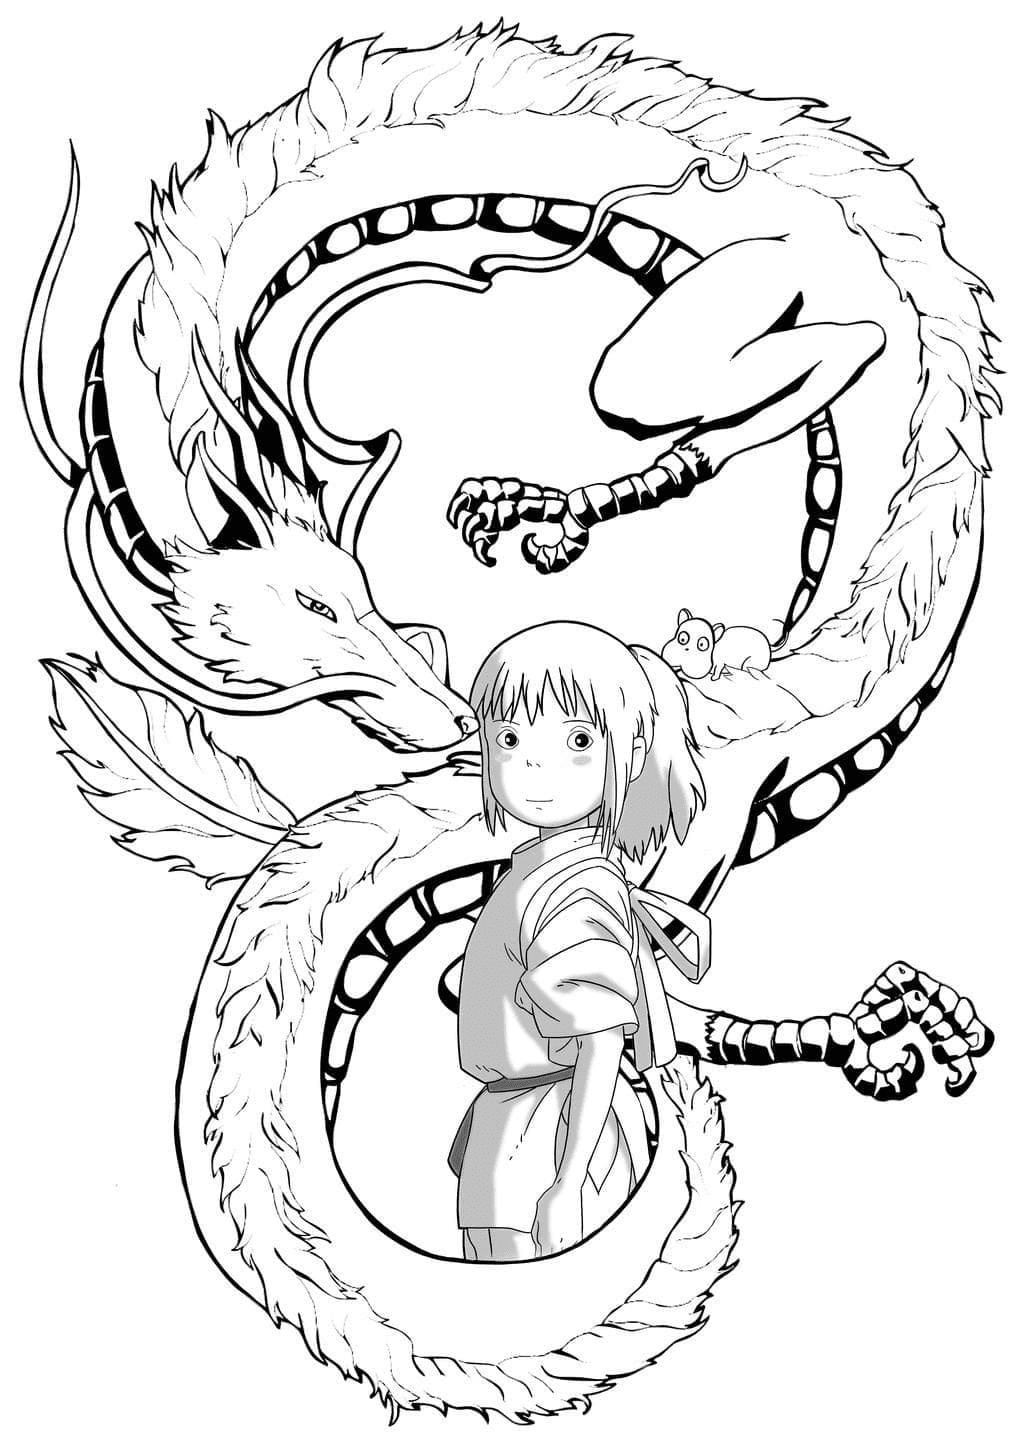 River Spirit and Chihiro from Spirited Away Coloring Pages